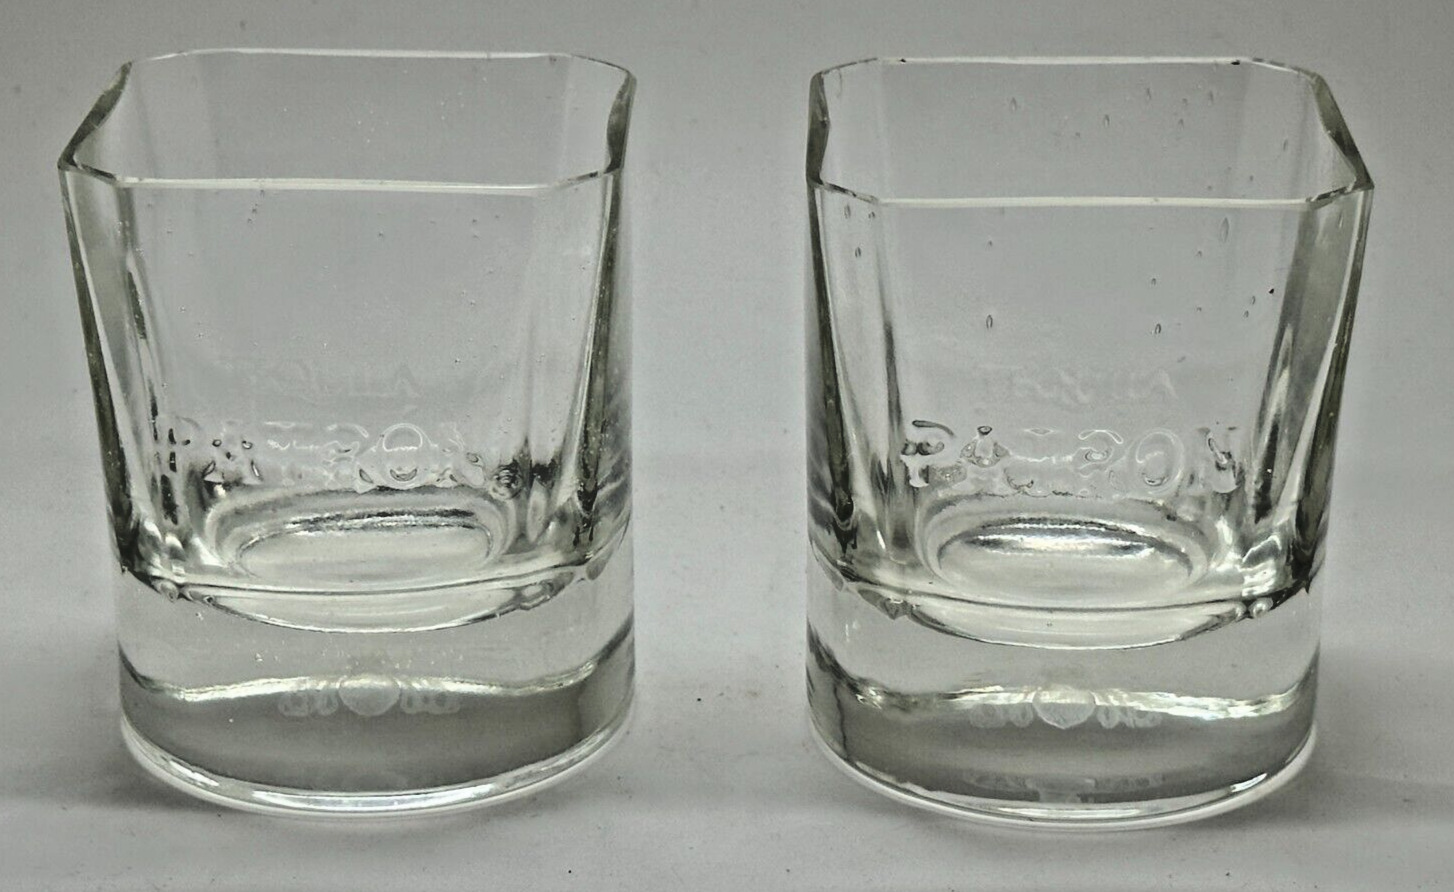 PAIR OF HEAVY TEQUILA PATRON TEQUILA GLASSES - PUB BAR HOME 2 TWO TUMBLER